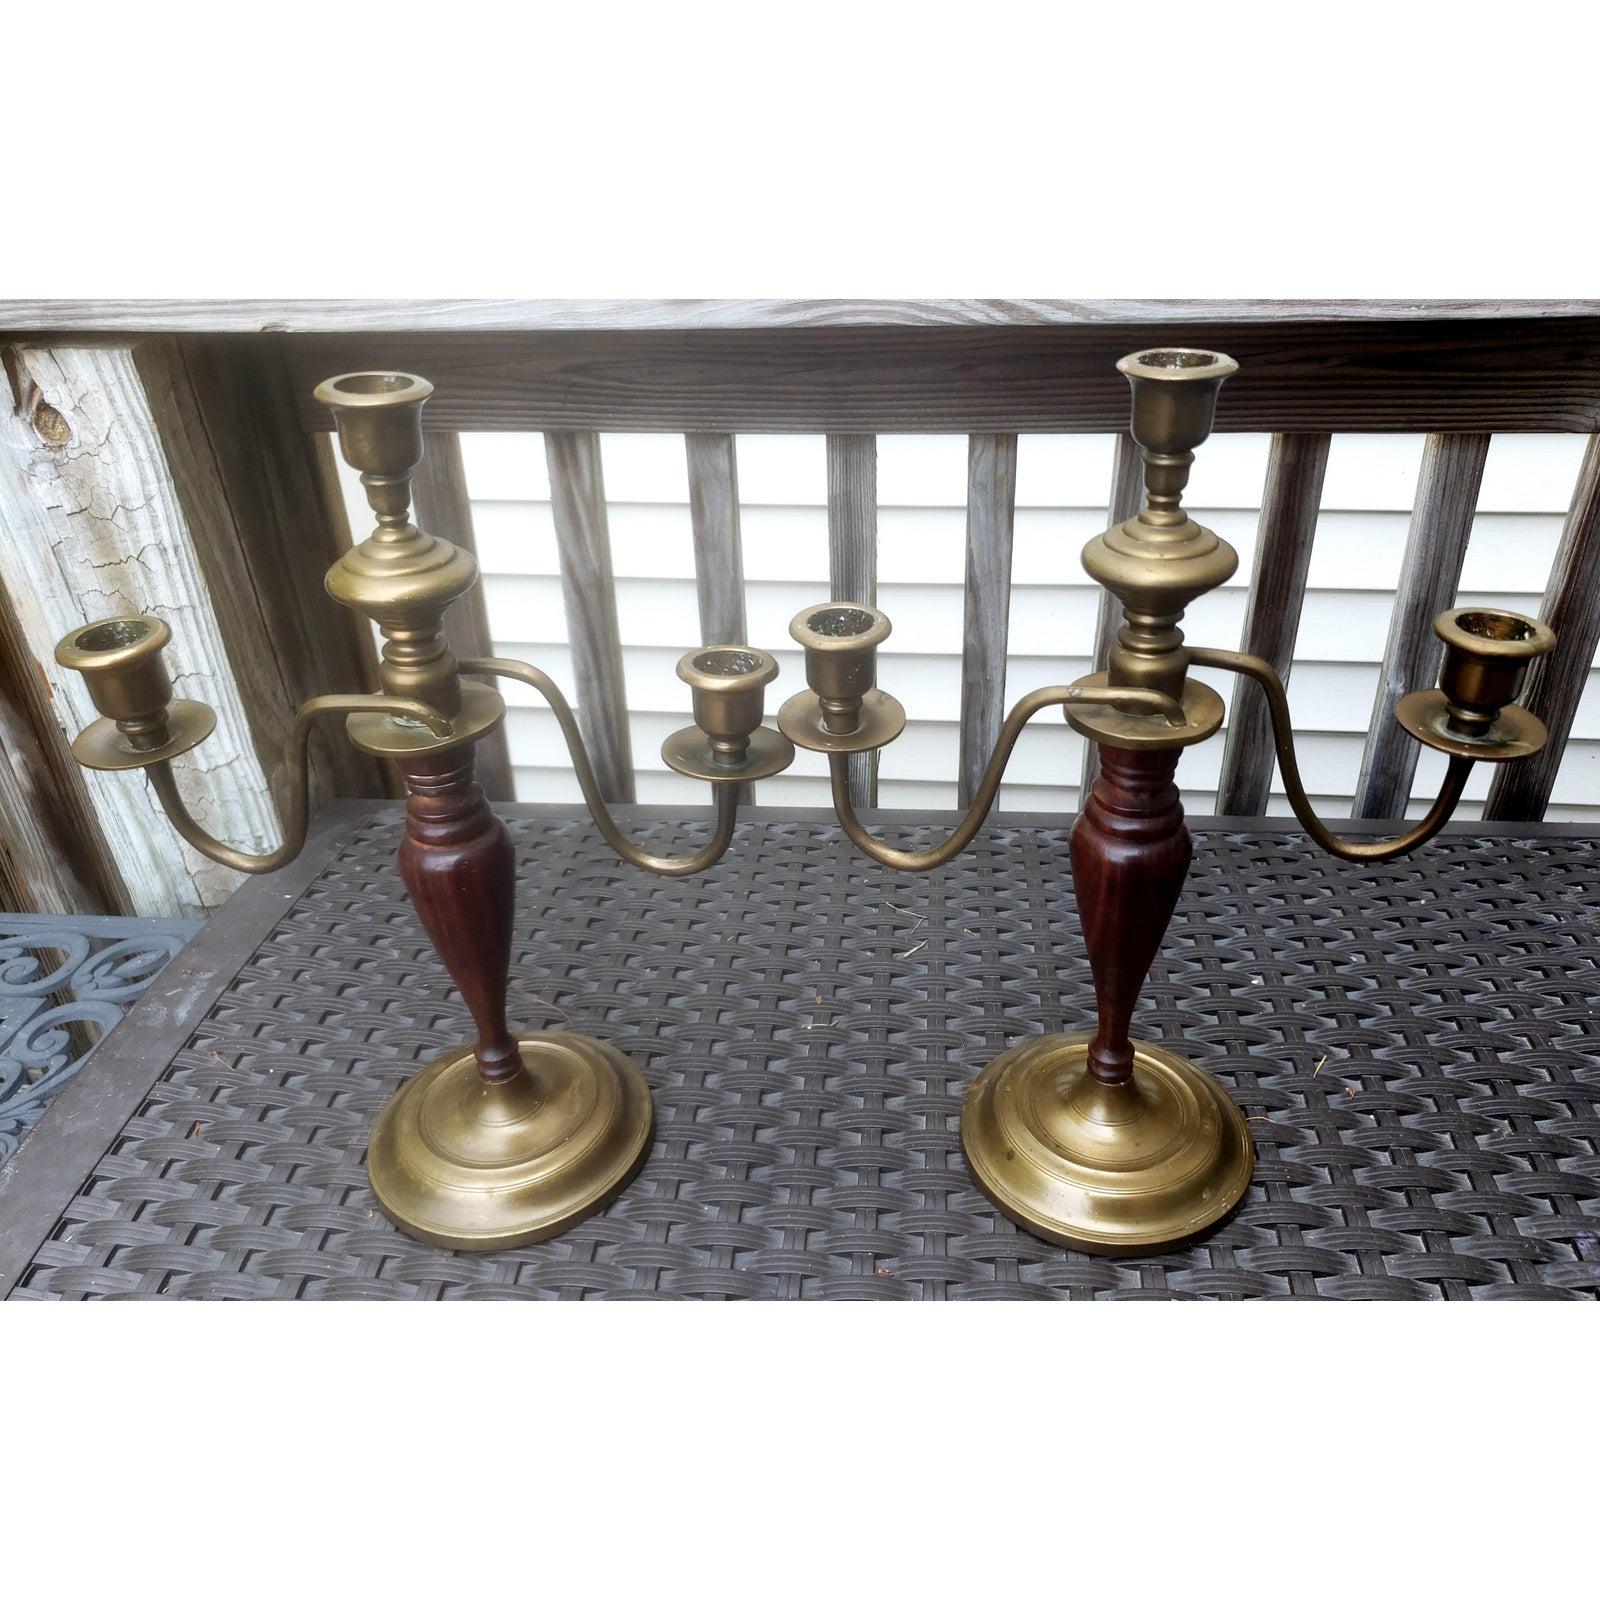 19th Century Mahogany and Brass Candelabras, a Pair For Sale 7